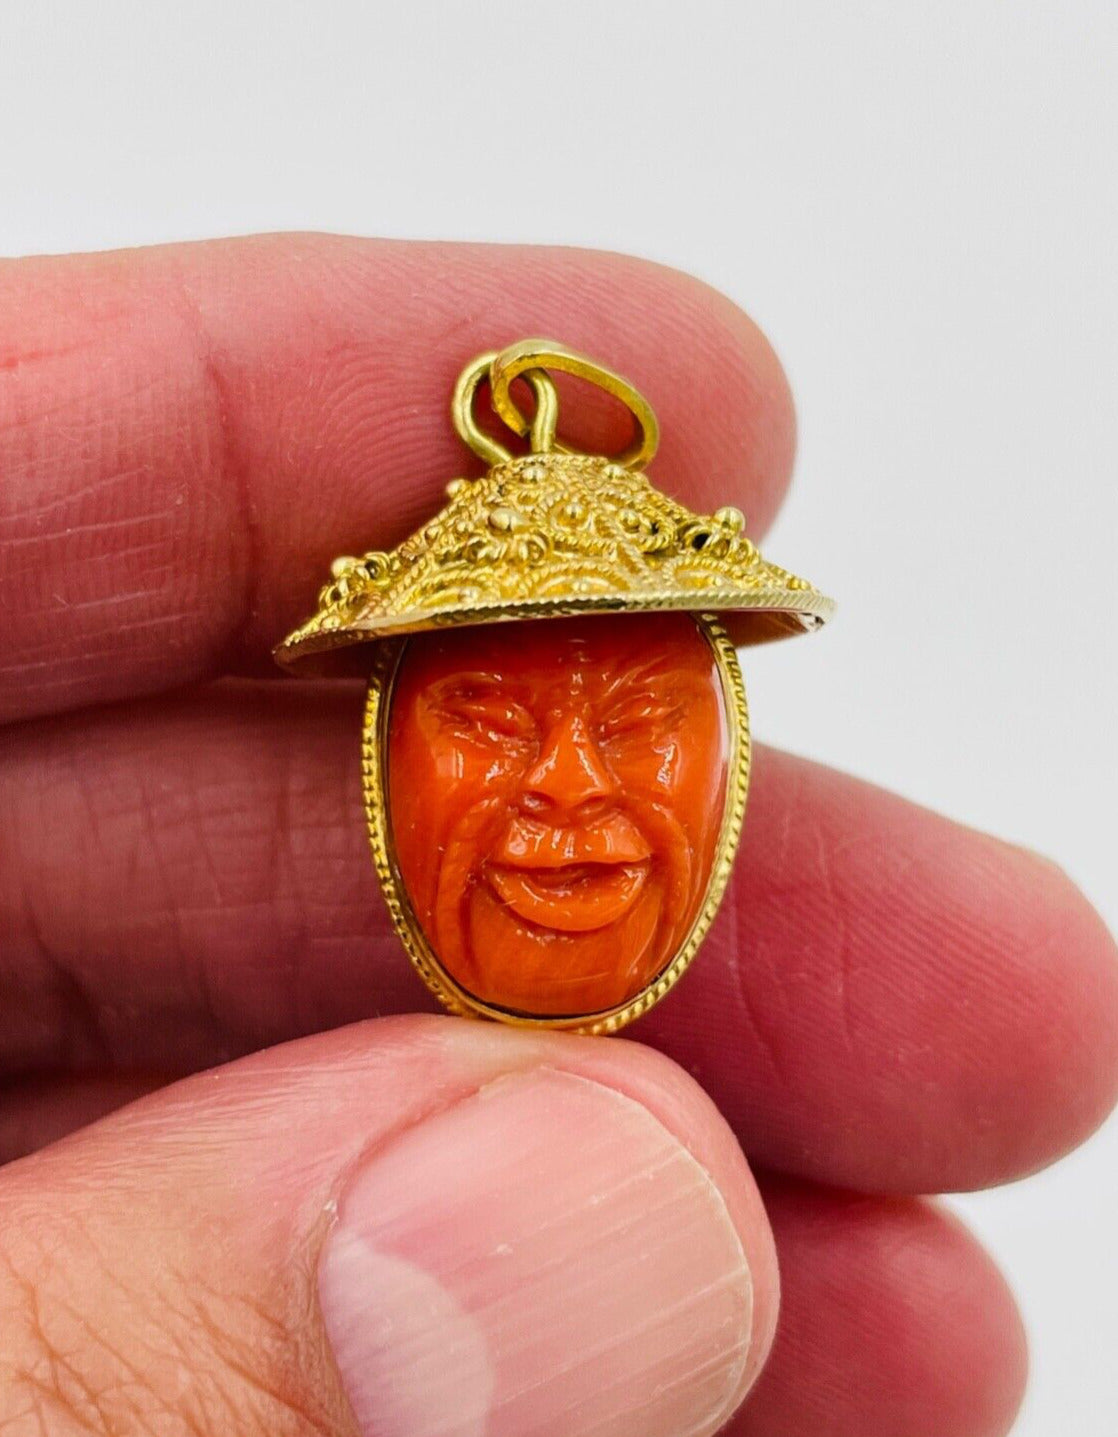 Unique 18K Yellow Gold Carved Asian Double sided Face Red Coral Pendant Charm